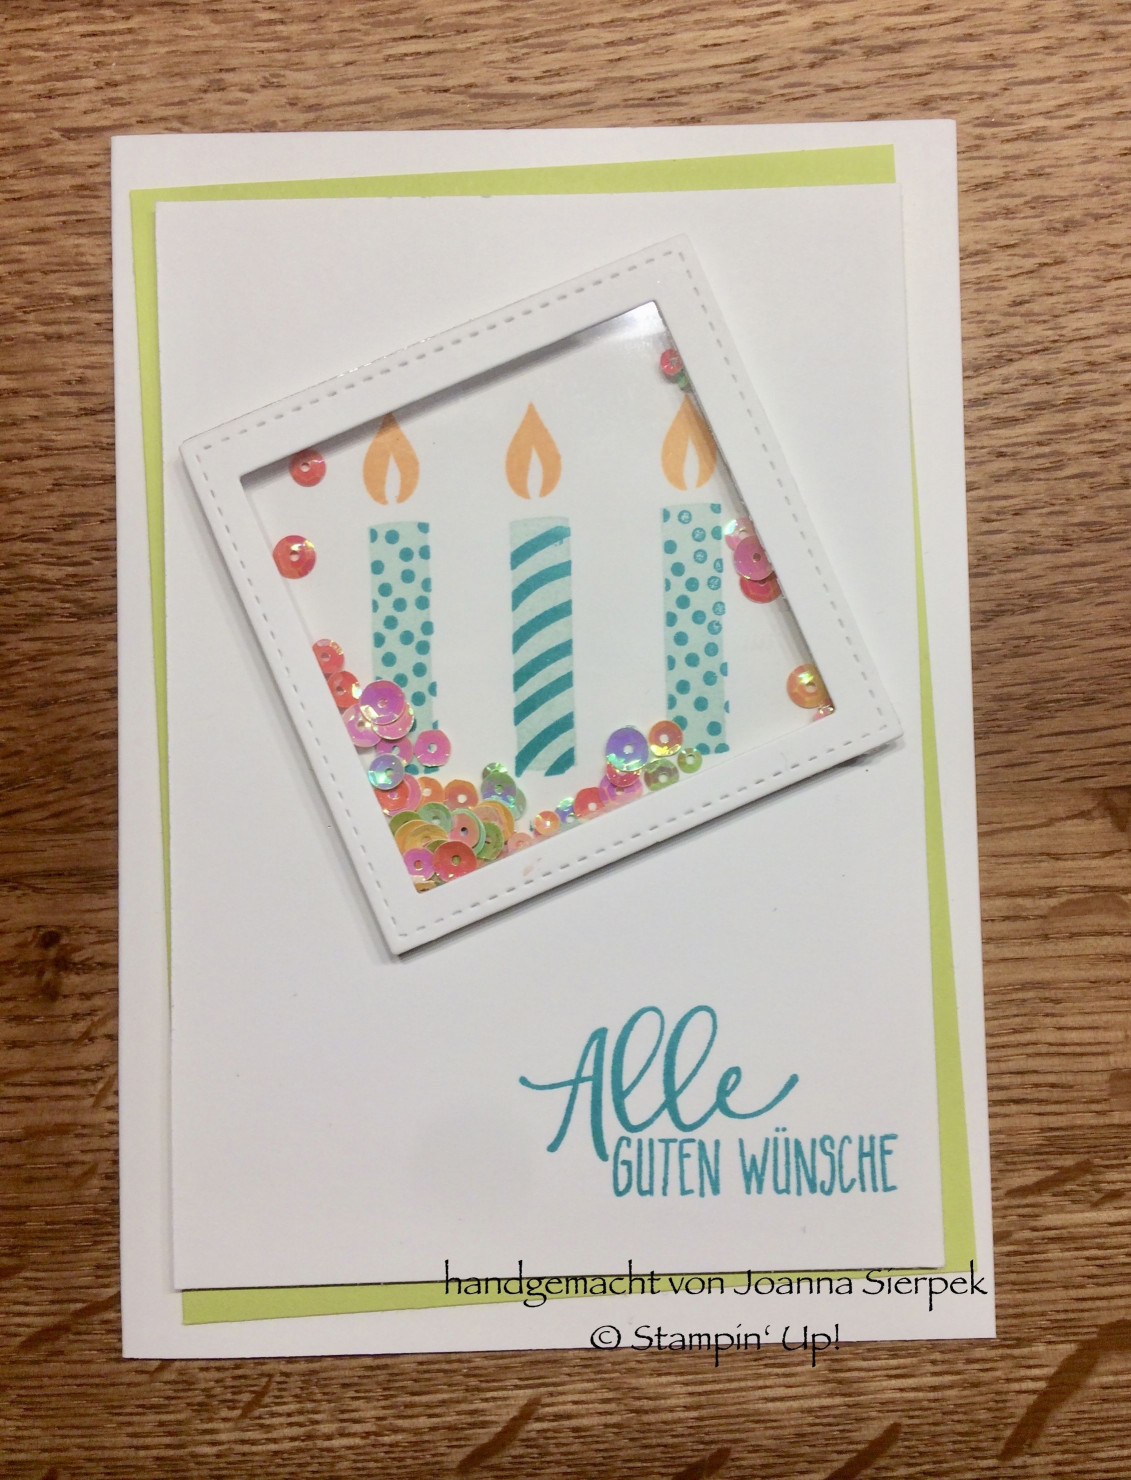 Homemade Birthday Cards Ideas 20 Excellent Homemade Birthday Card Ideas Wallpaper Best Birthday